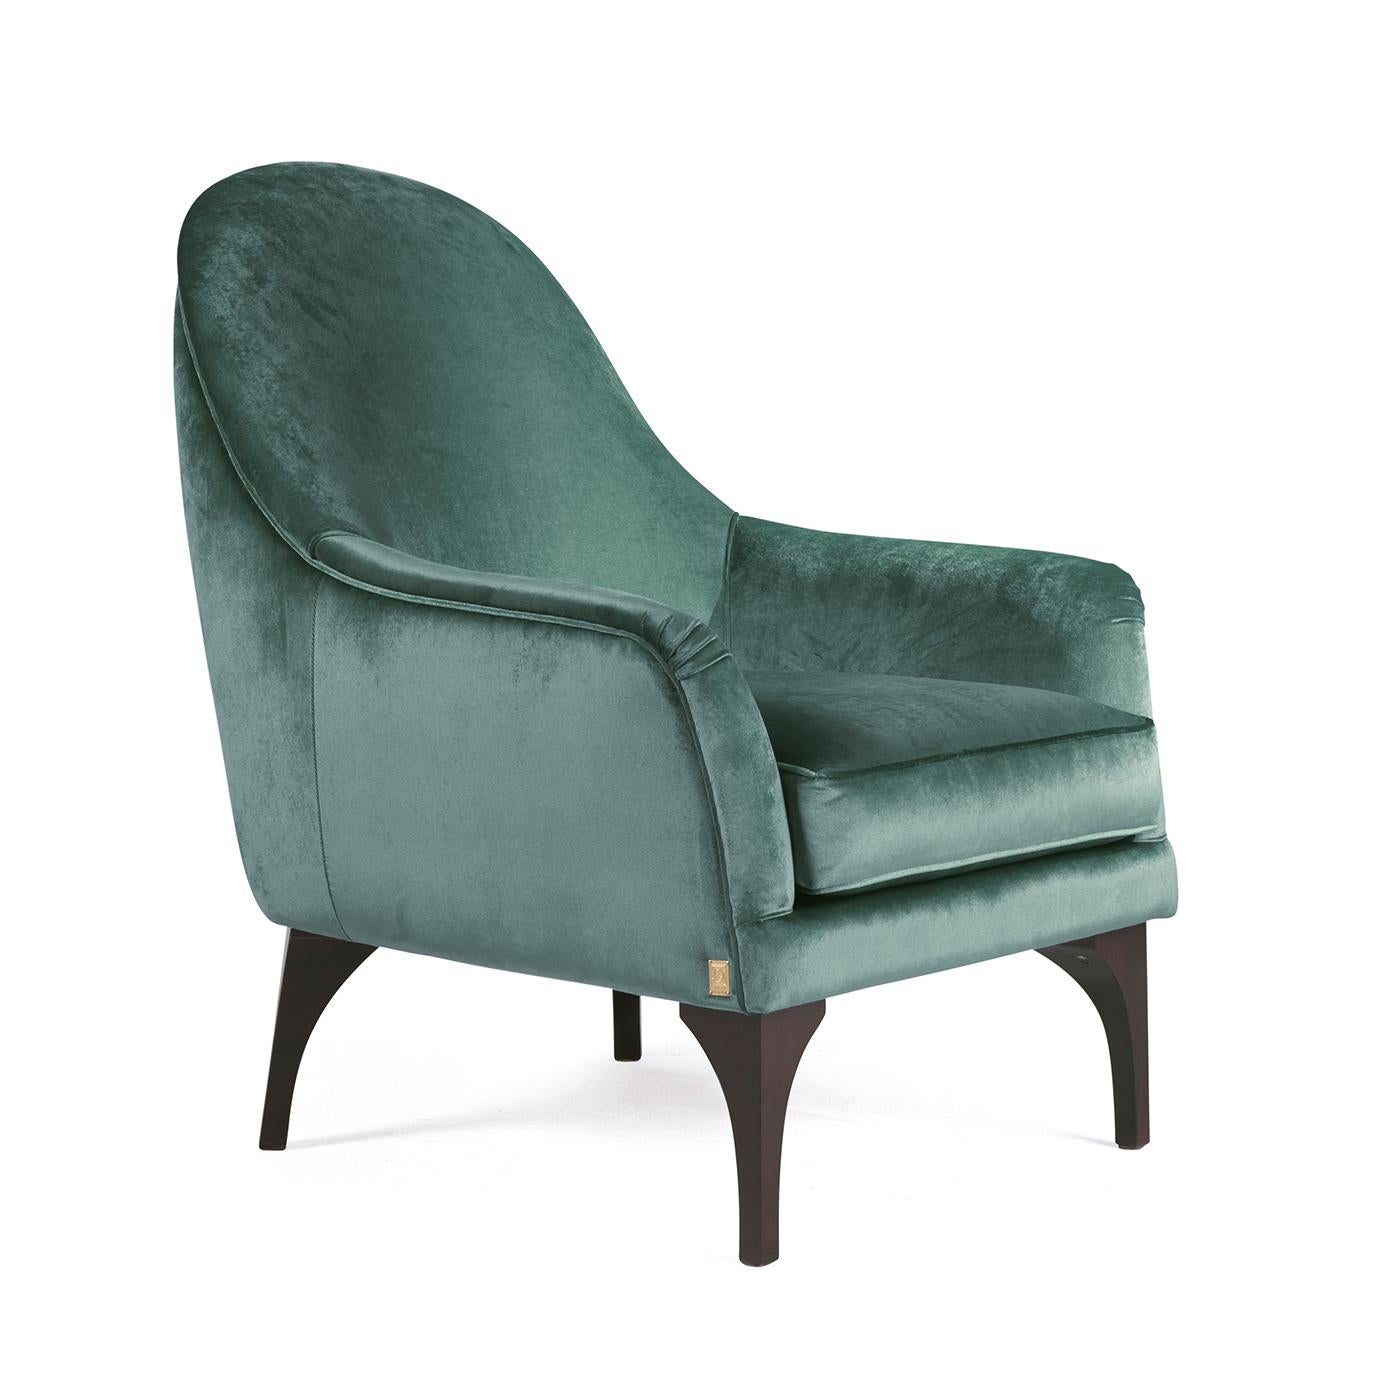 This elegant armchair features delicate curves that are both comfortable and sophisticated and will be an exquisite accent to a Classic living room. The structure is in solid wood, cushioned with hypoallergenic polyurethane and a goose